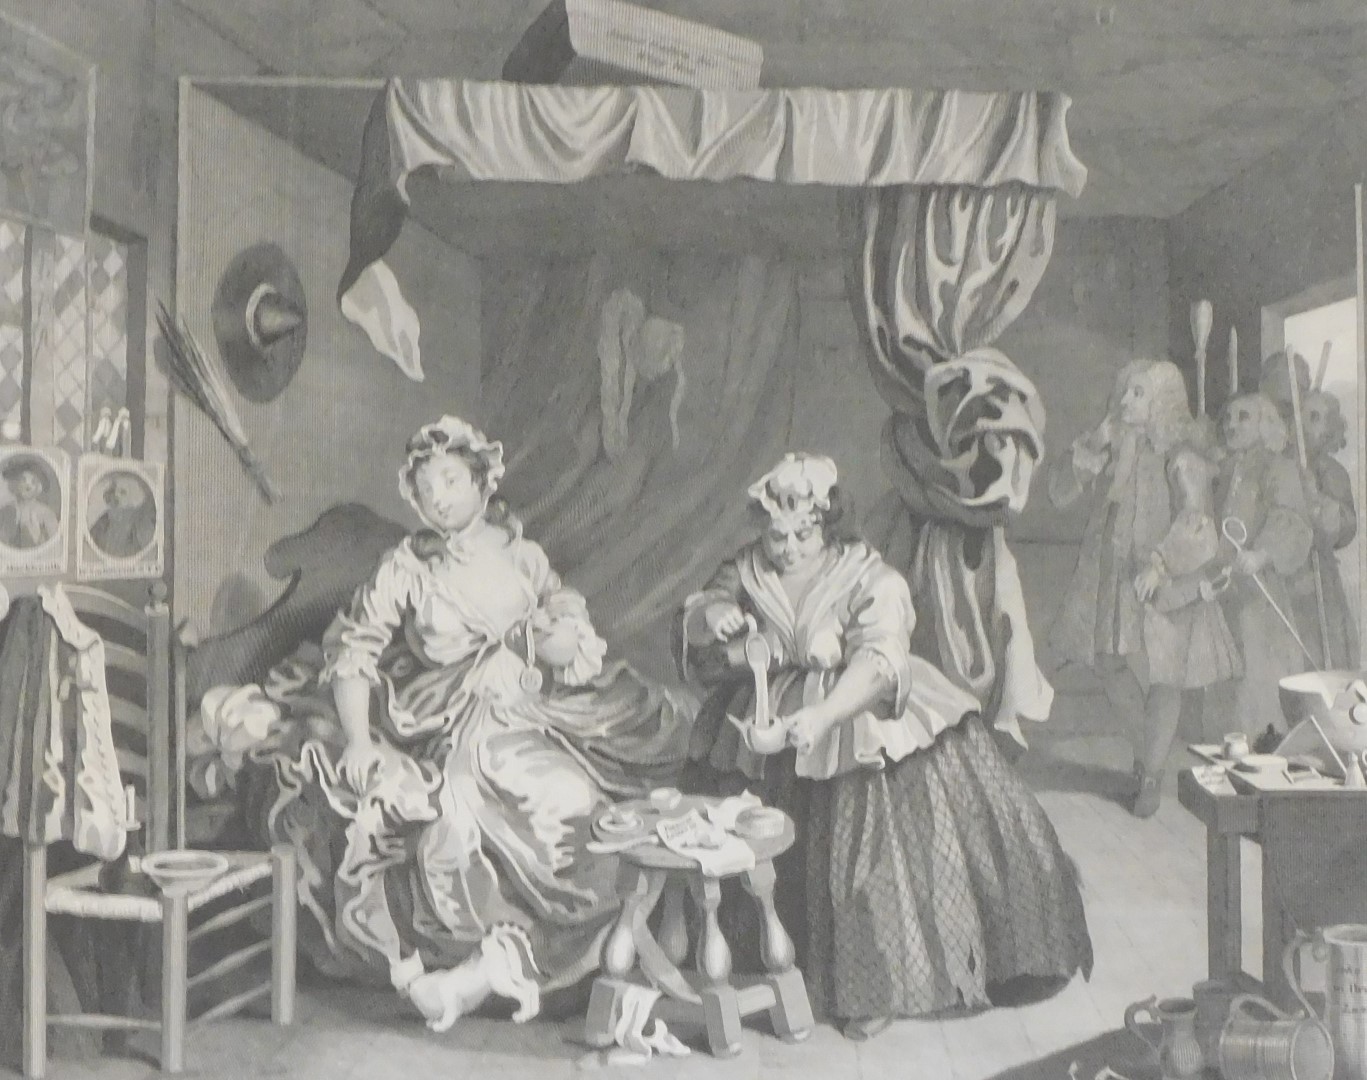 After William Hogarth (English, 1697-1764) A Harlots Progress, engravings, plates one to six, publis - Image 4 of 7